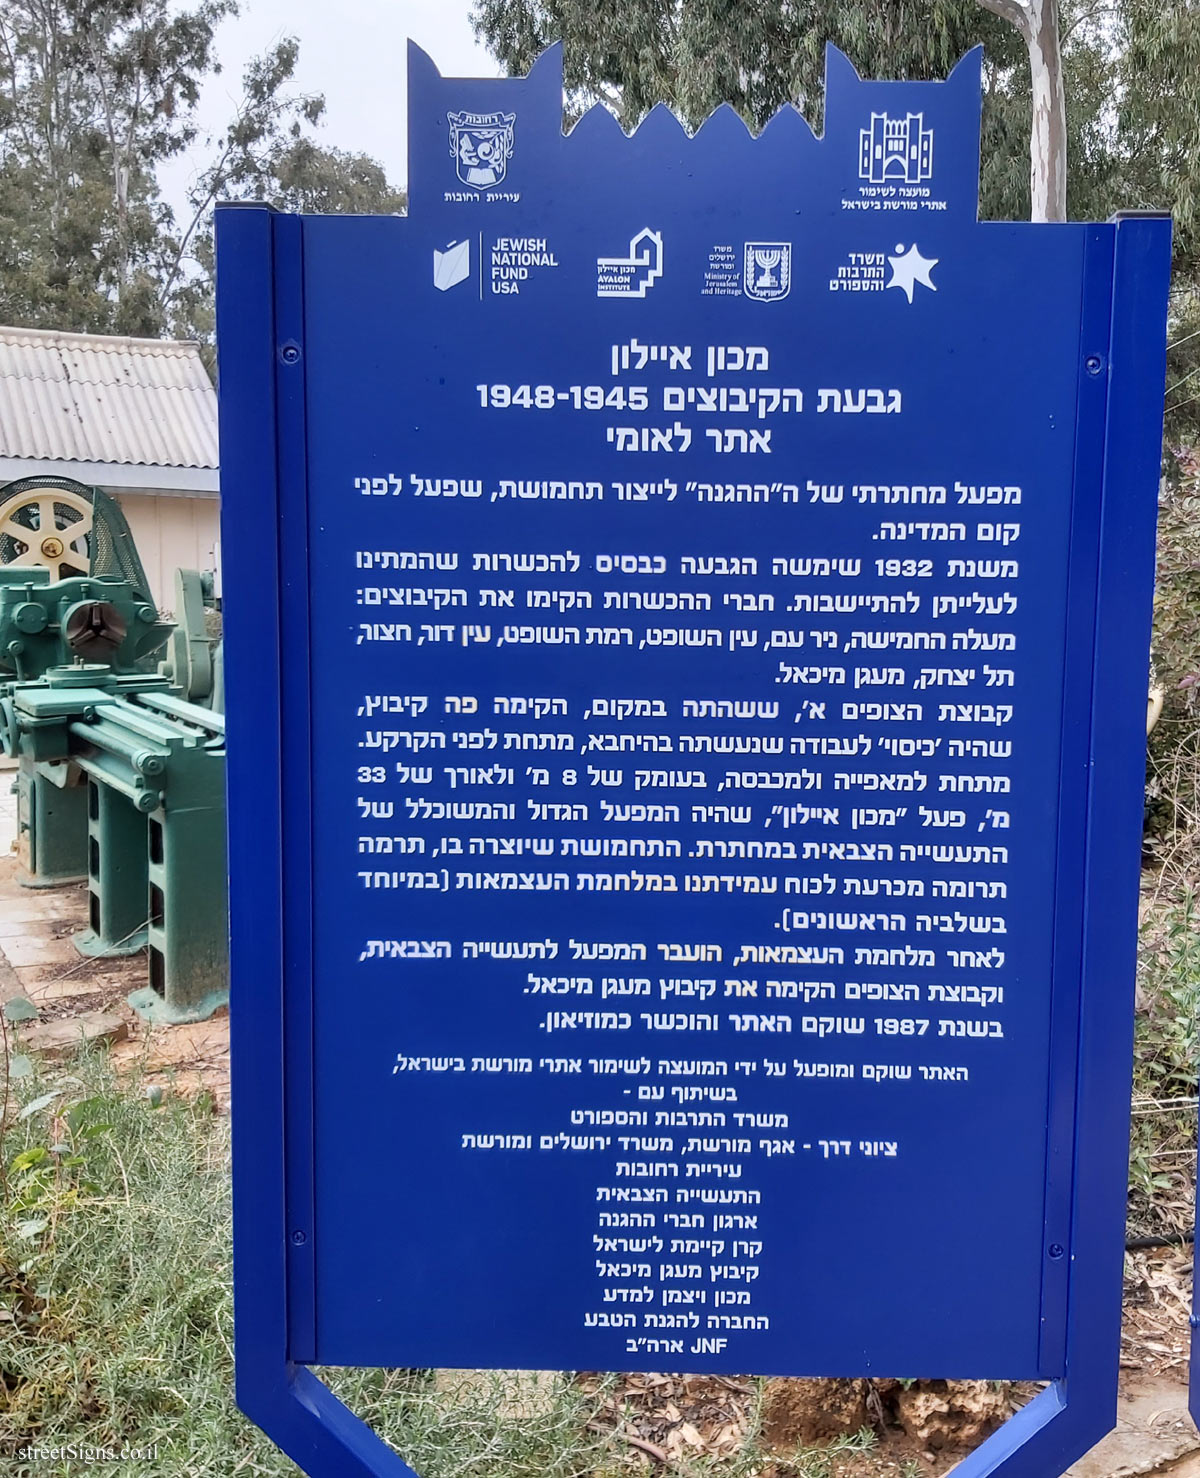 Rehovot - Heritage Sites in Israel - Ayalon Institute - David Fikes St 1, Rehovot, Israel